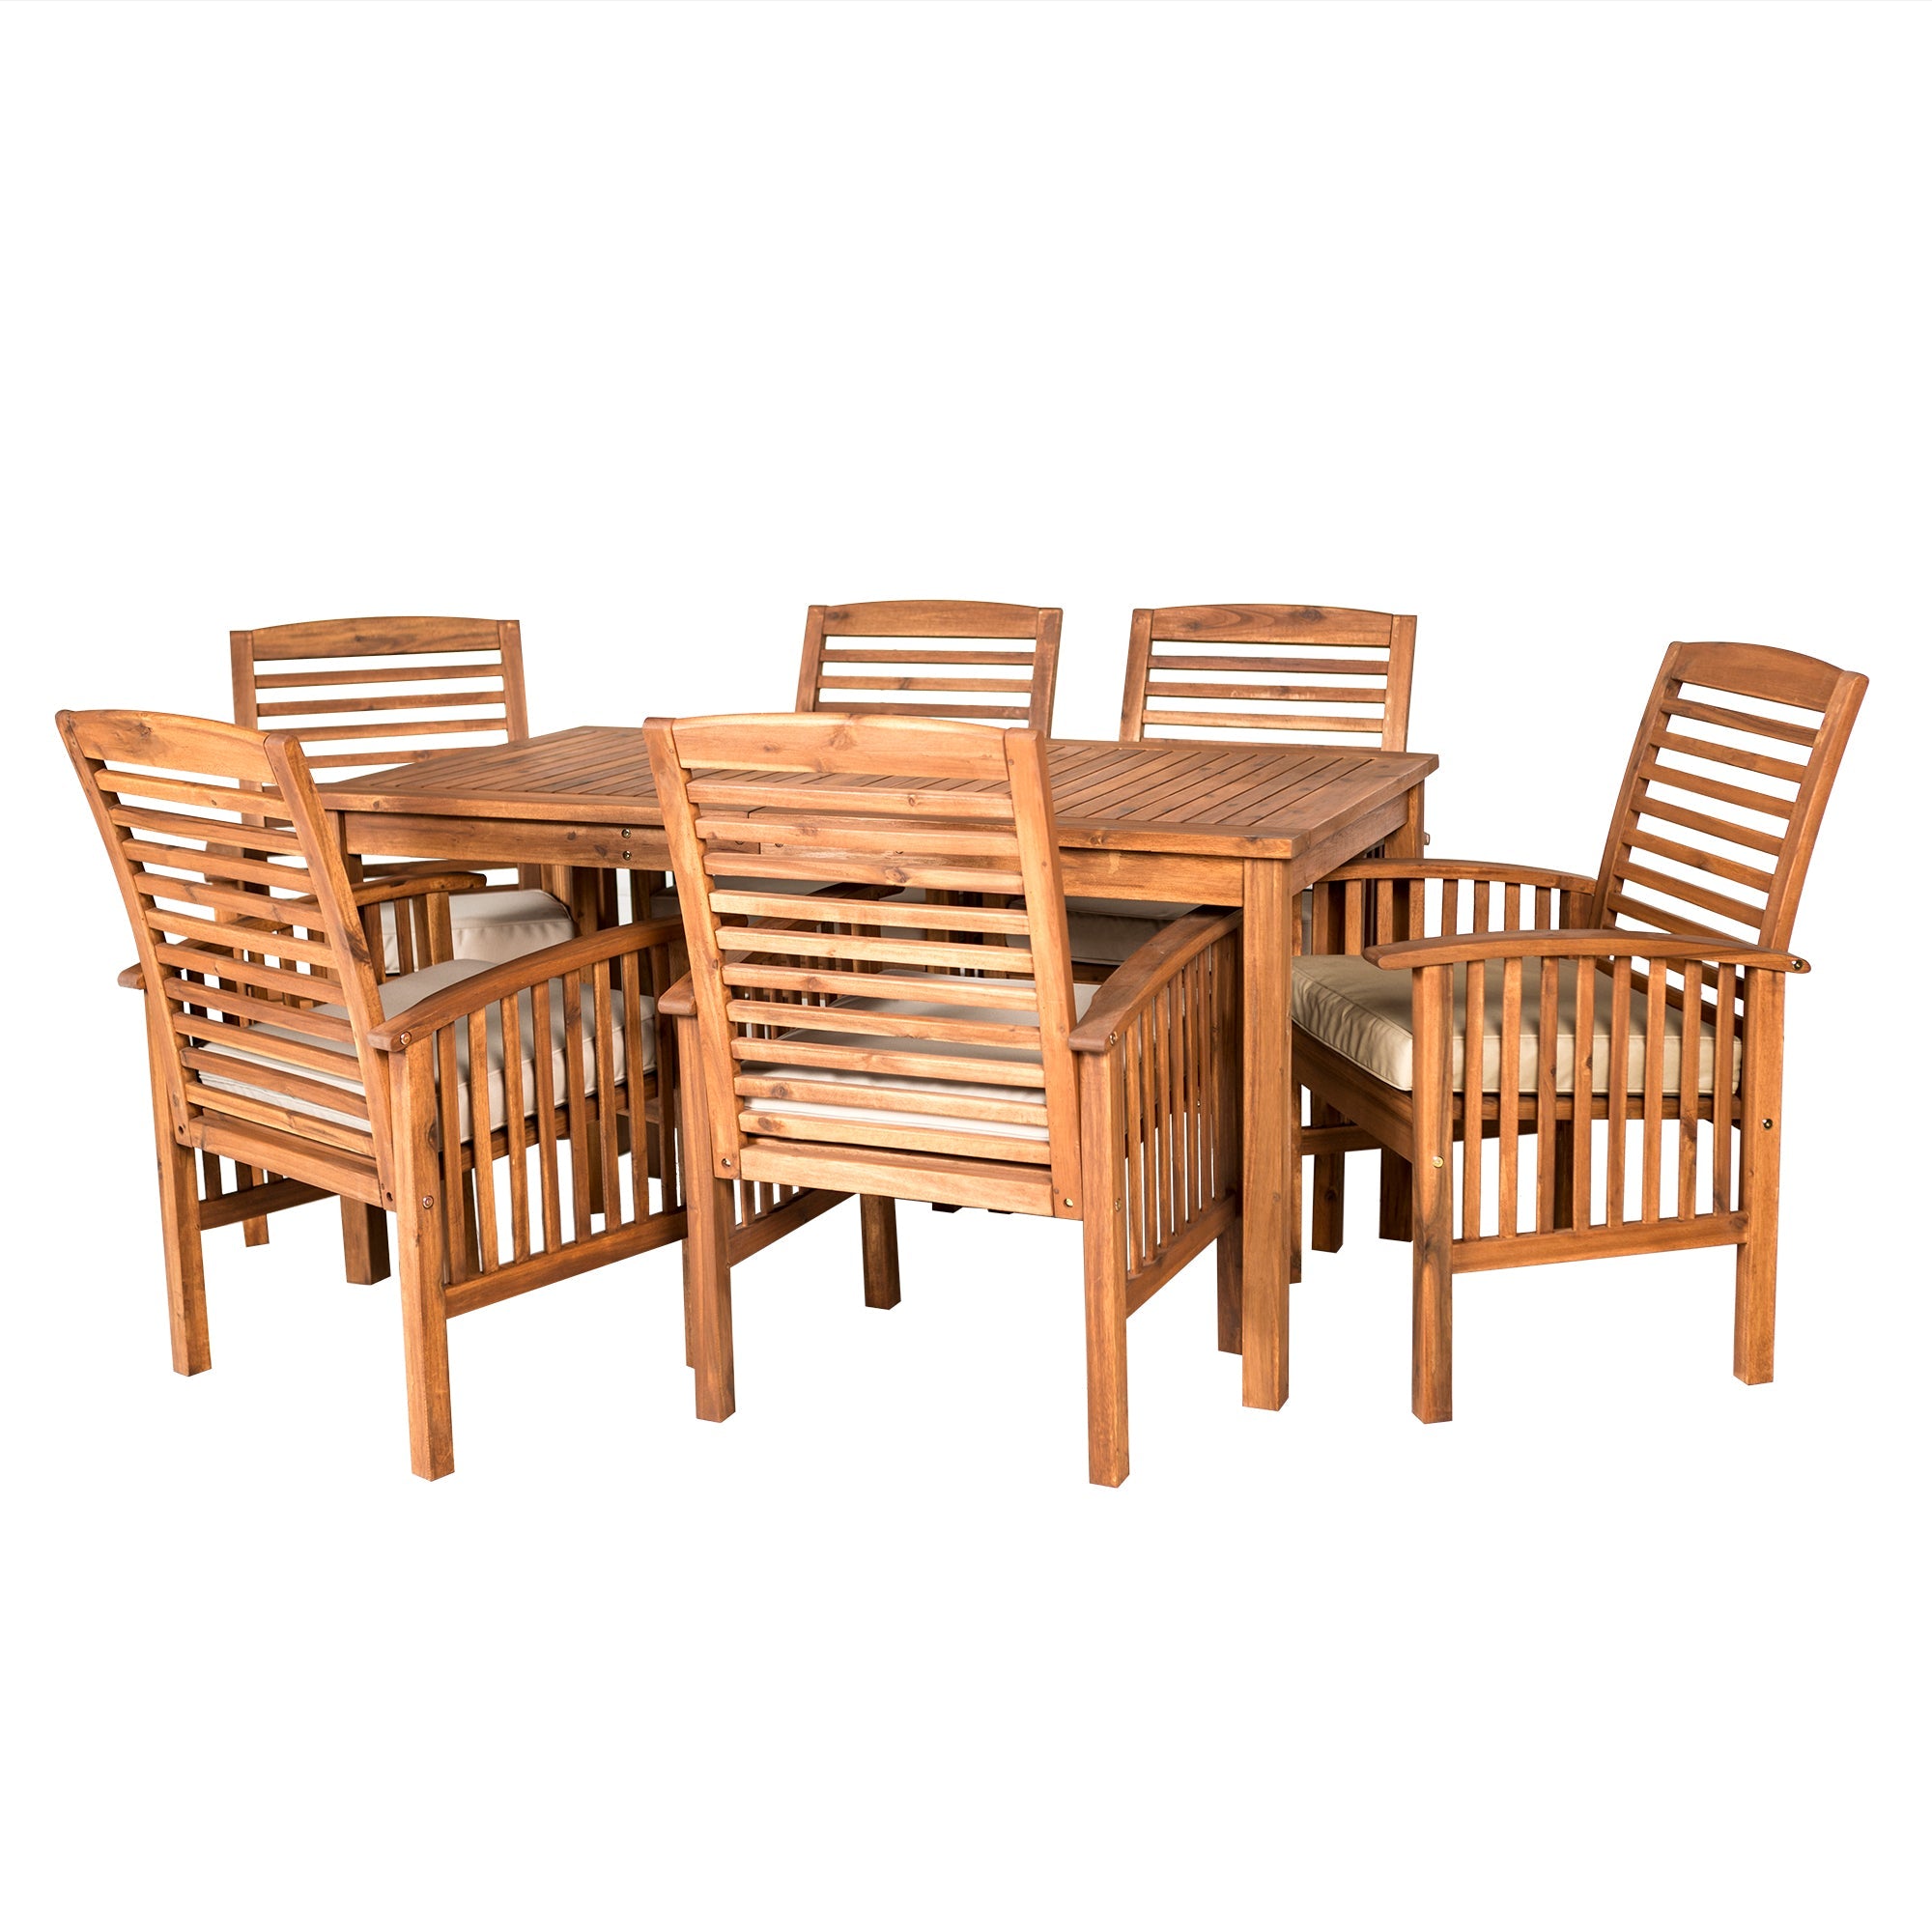 Midland 7-Piece Extendable Acacia Wood Outdoor Patio Dining Set with Cushions - East Shore Modern Home Furnishings